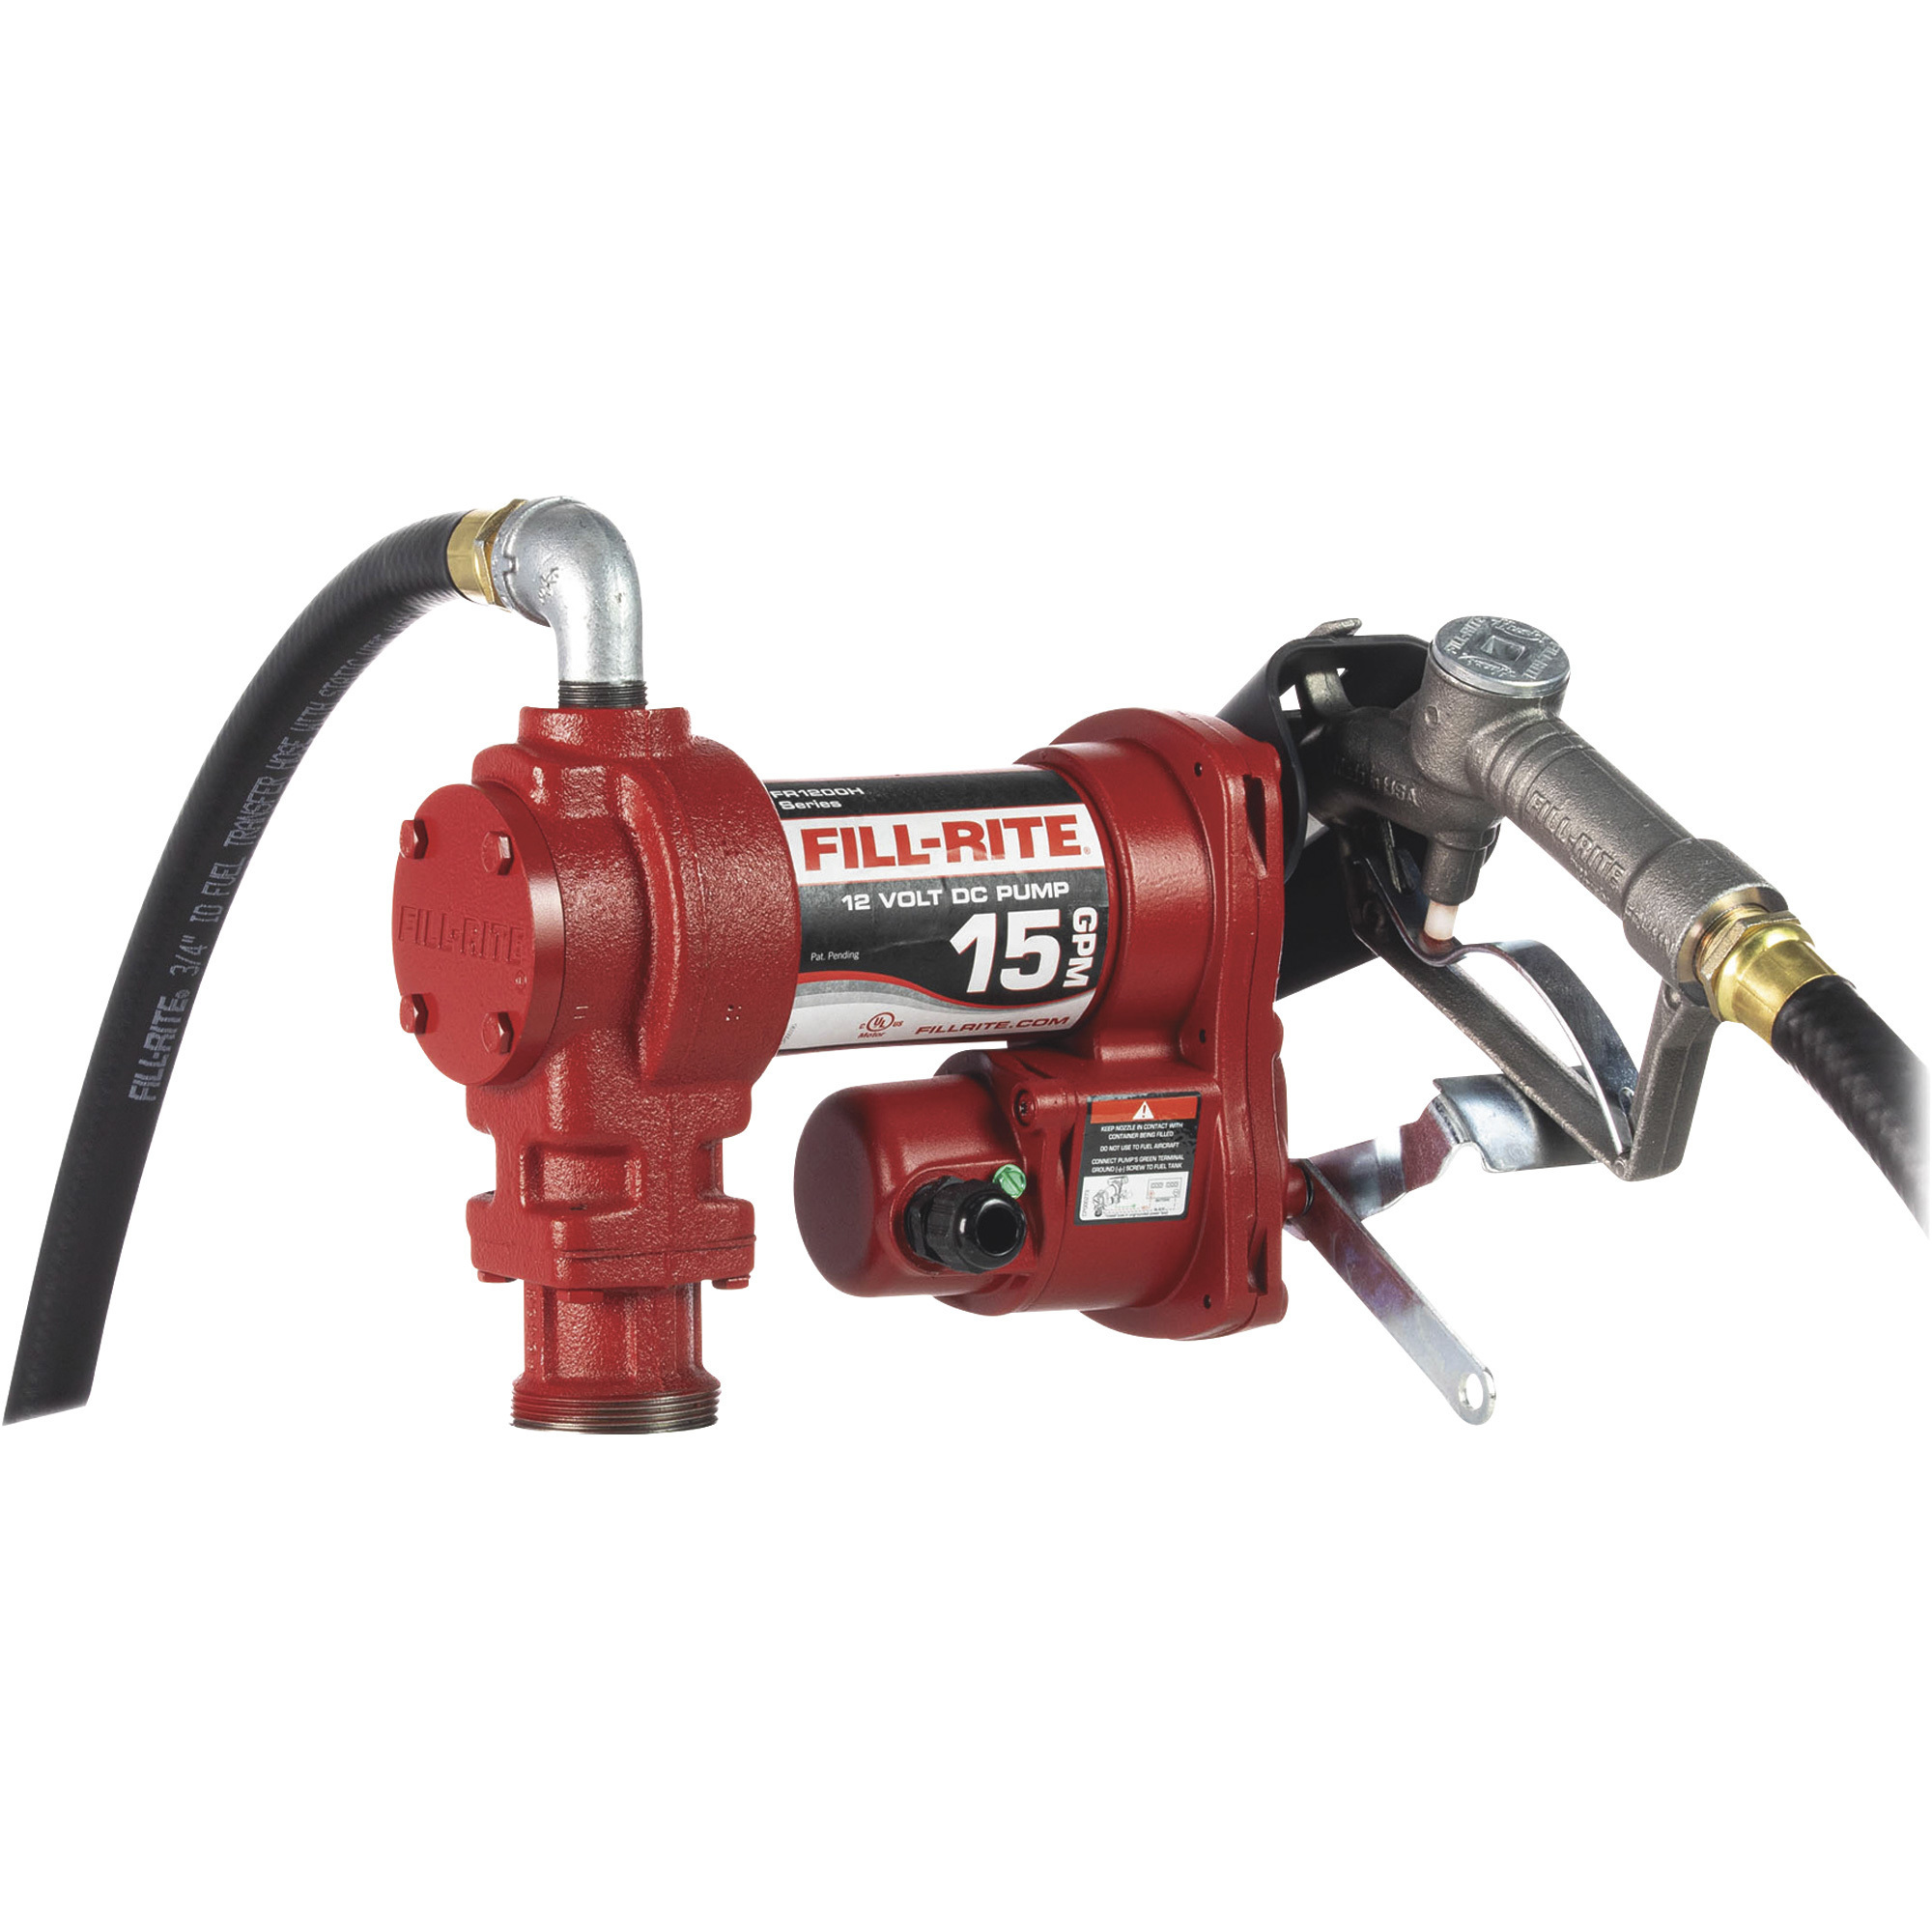 12V DC Fuel Transfer Pump Kit — 15 GPM, 3/4Inch Manual Nozzle, 3/4Inch x 12ft. Hose, Model - Fill-Rite FR1210H